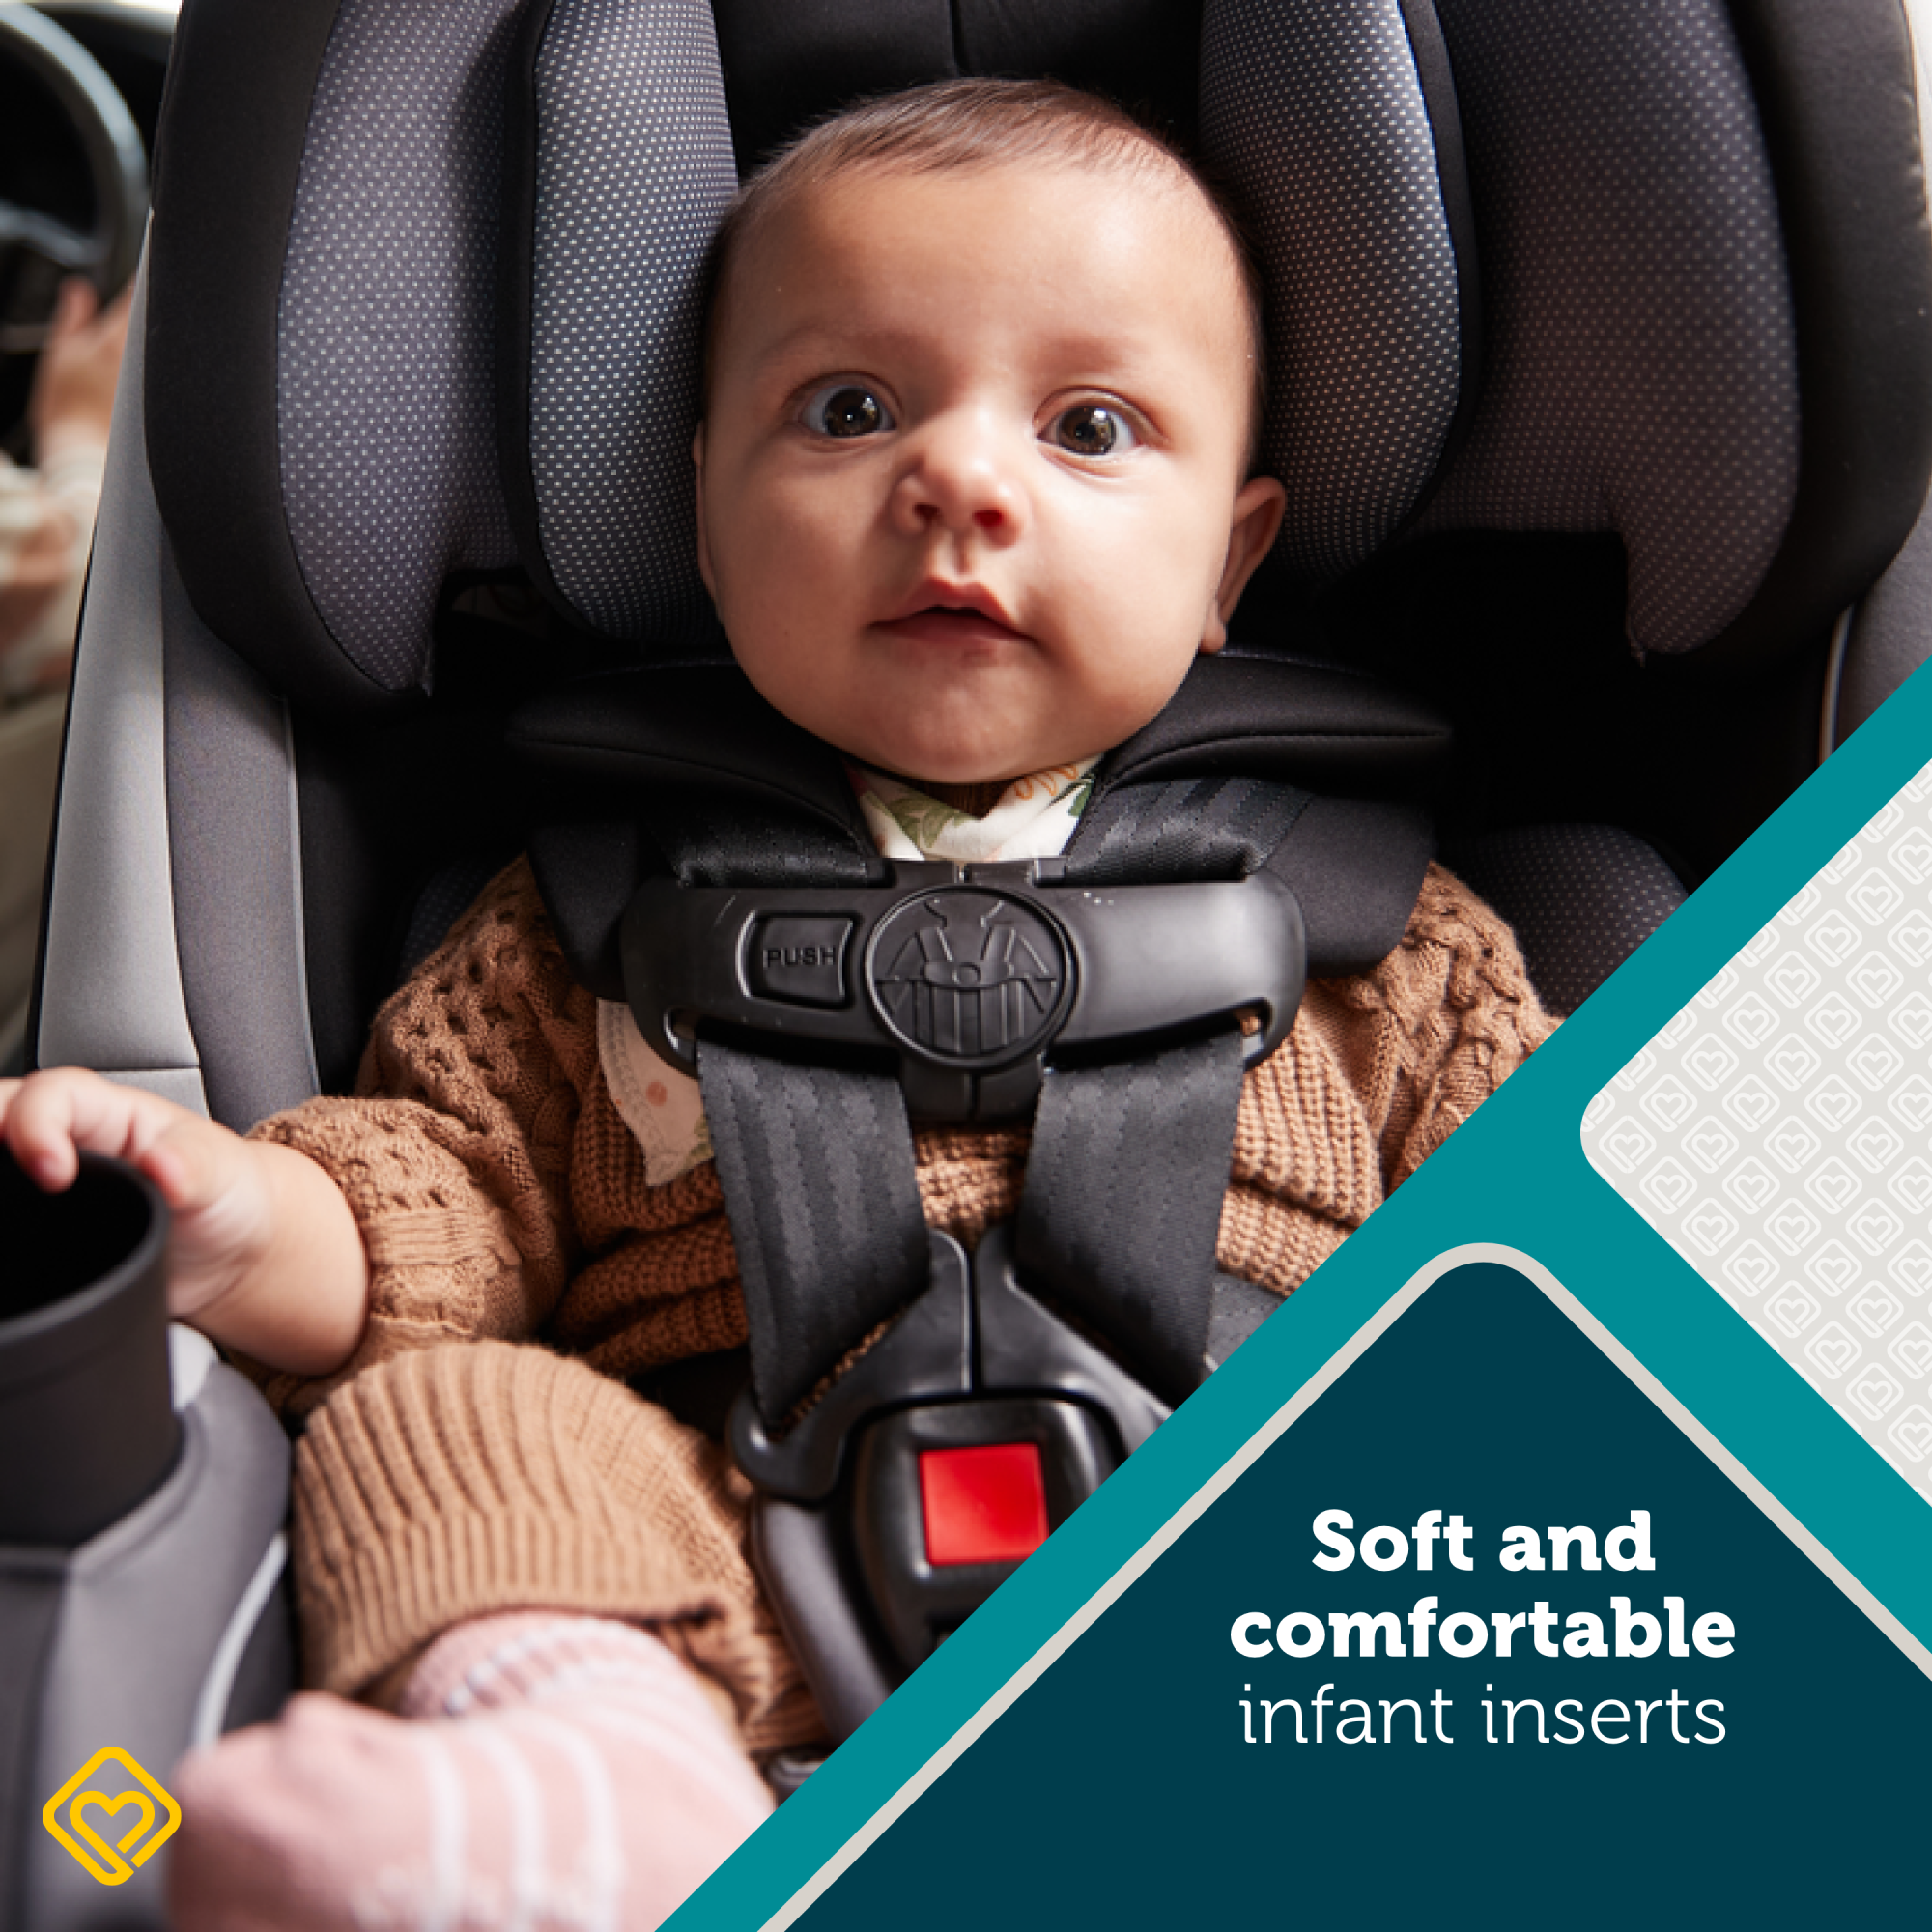 TriMate™ All-in-One Convertible Car Seat - machine-washable and dryer-safe seat pad